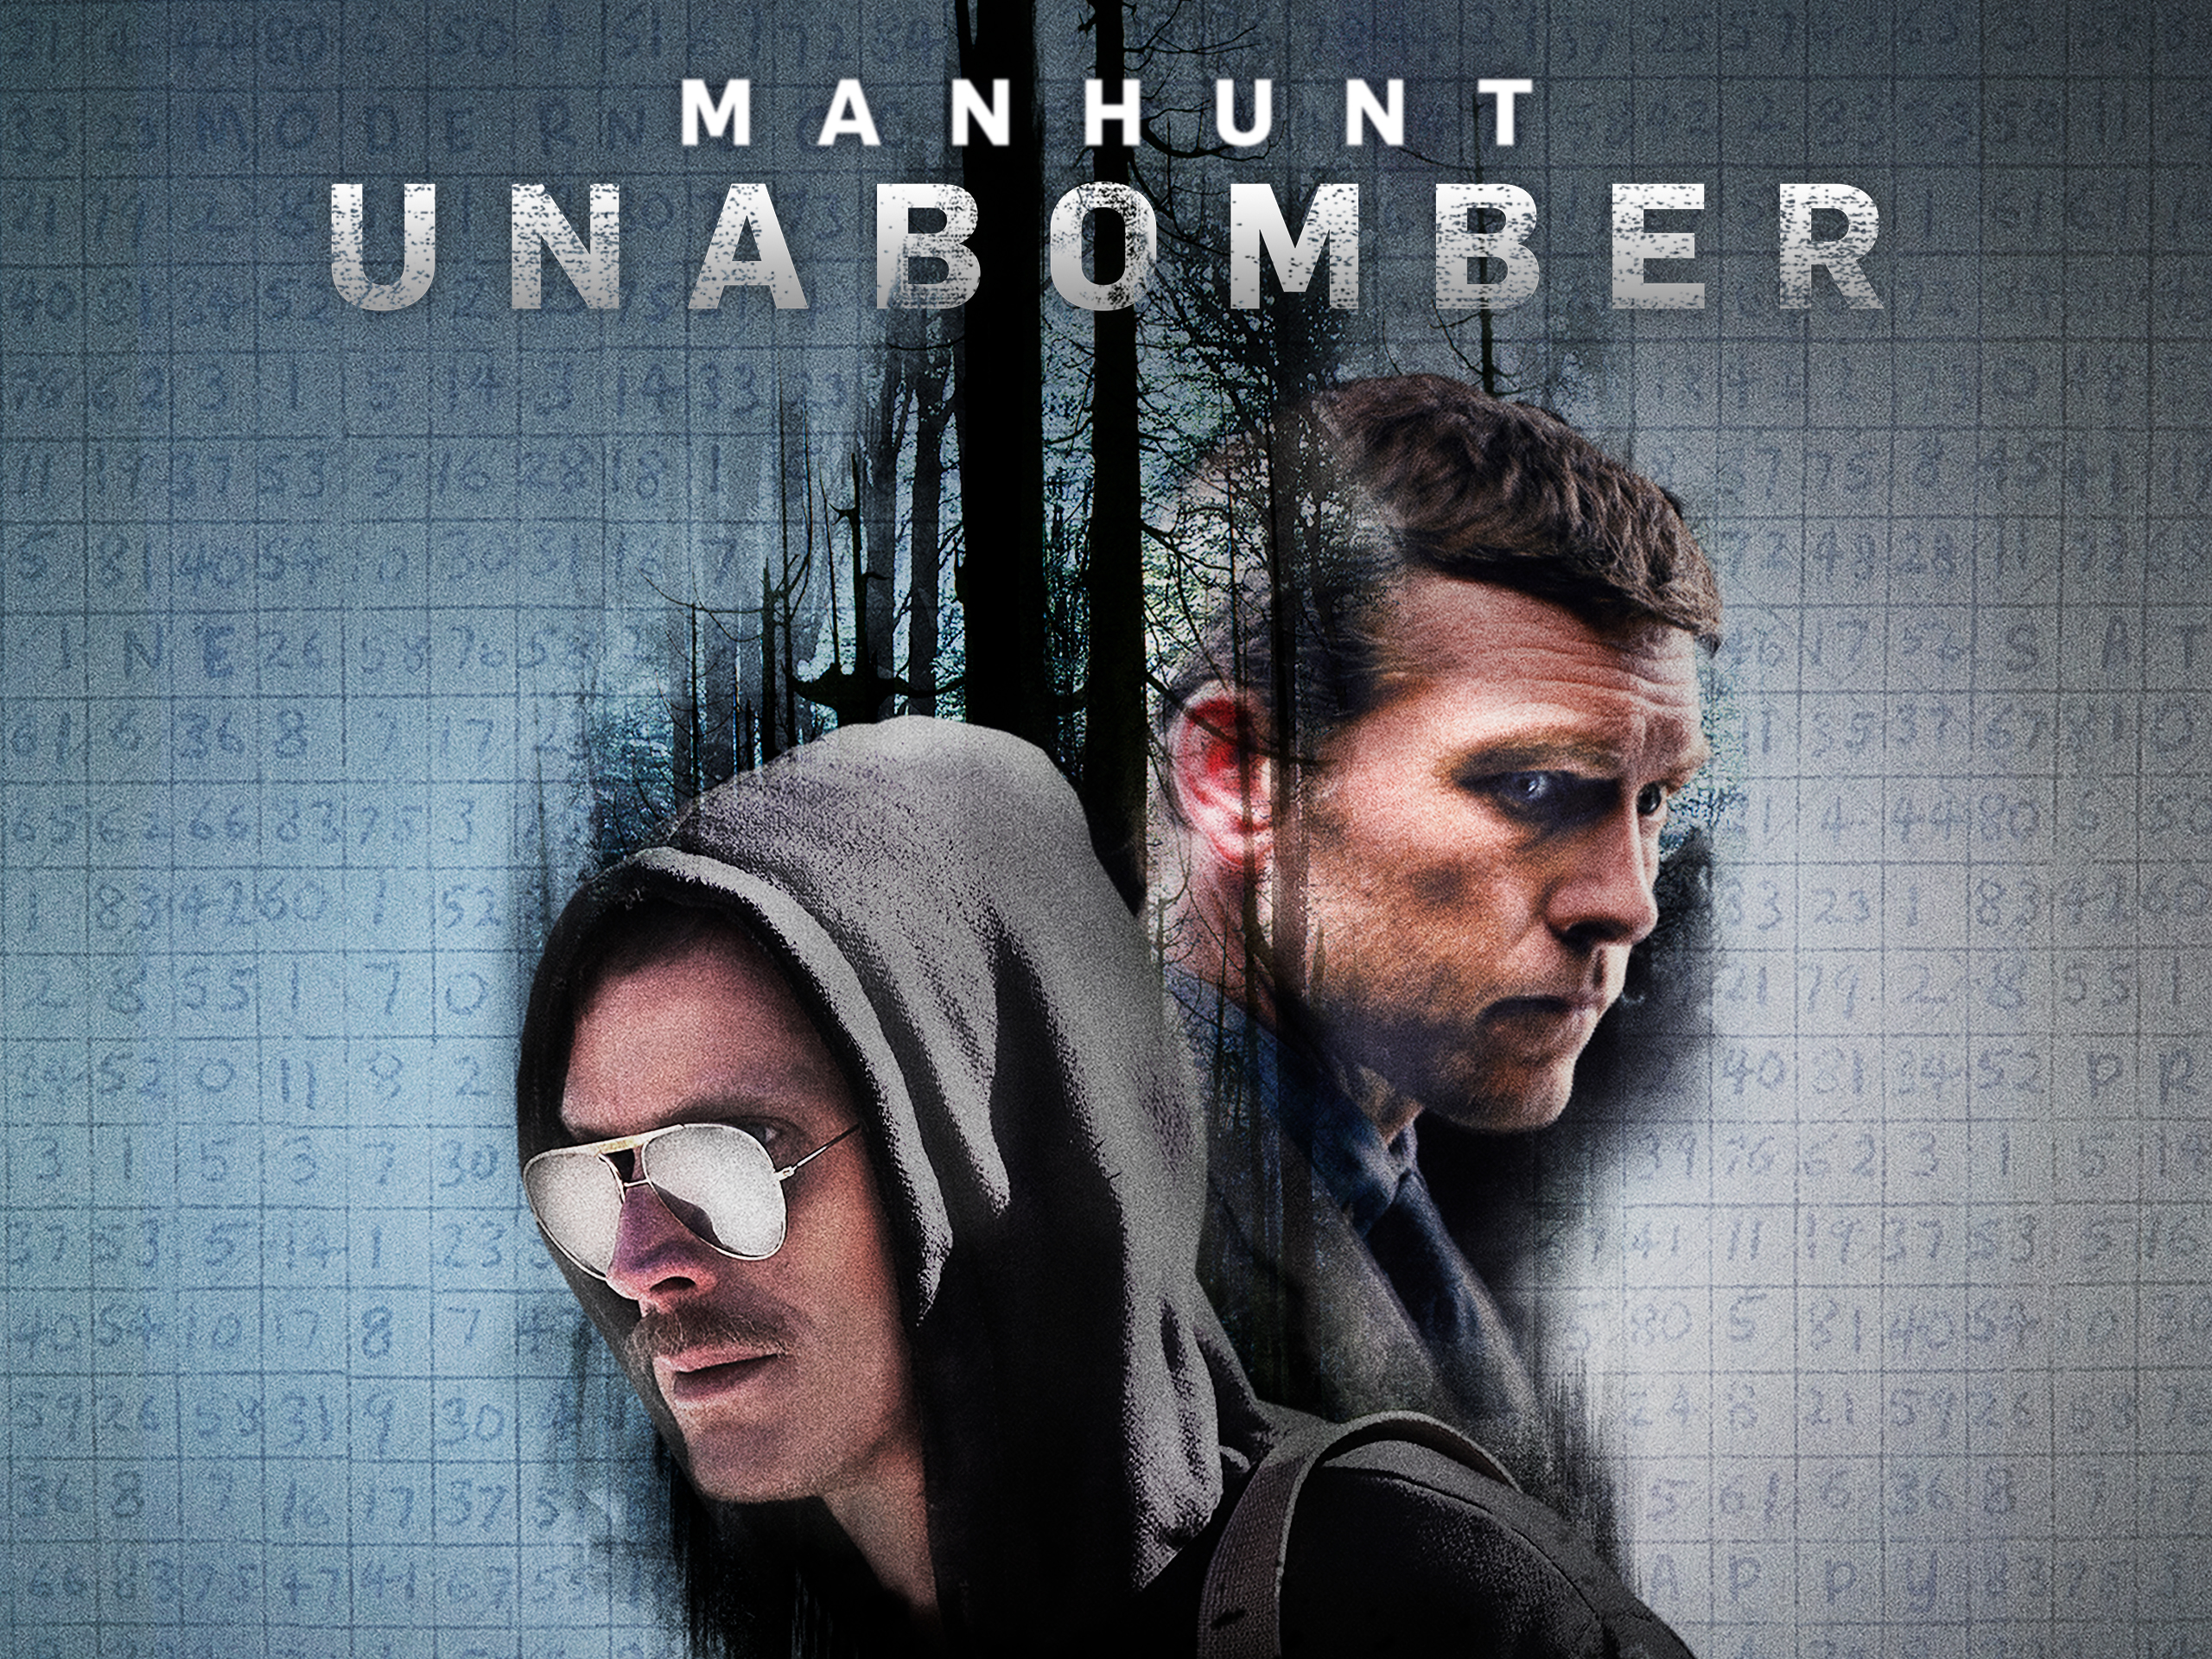 Genre: Drama, and True crime, Created by Andrew Sodroski, Jim Clemente, and Tony Gittelson, Starring: Sam Worthington, Paul Bettany, Jeremy Bobb, Keisha Castle-Hughes, Lynn Collins, Brían F. O'Byrne, Elizabeth Reaser, Ben Weber, Chris Noth, with Composer: Gregory Tripi (season 1), Country of origin: United States, Original language: English, No. of seasons: 2, No. of episodes: 18, Executive producers: Dana Brunetti, John Goldwyn, Troy Searer, Andrew Sodroski, Kevin Spacey (season 1), and Greg Yaitanes, Producer: David A. Rosemont, Production companies: Discovery Communications, Trigger Street Productions, and Lionsgate Television, Original Network: Discovery Channel (2017-2020)